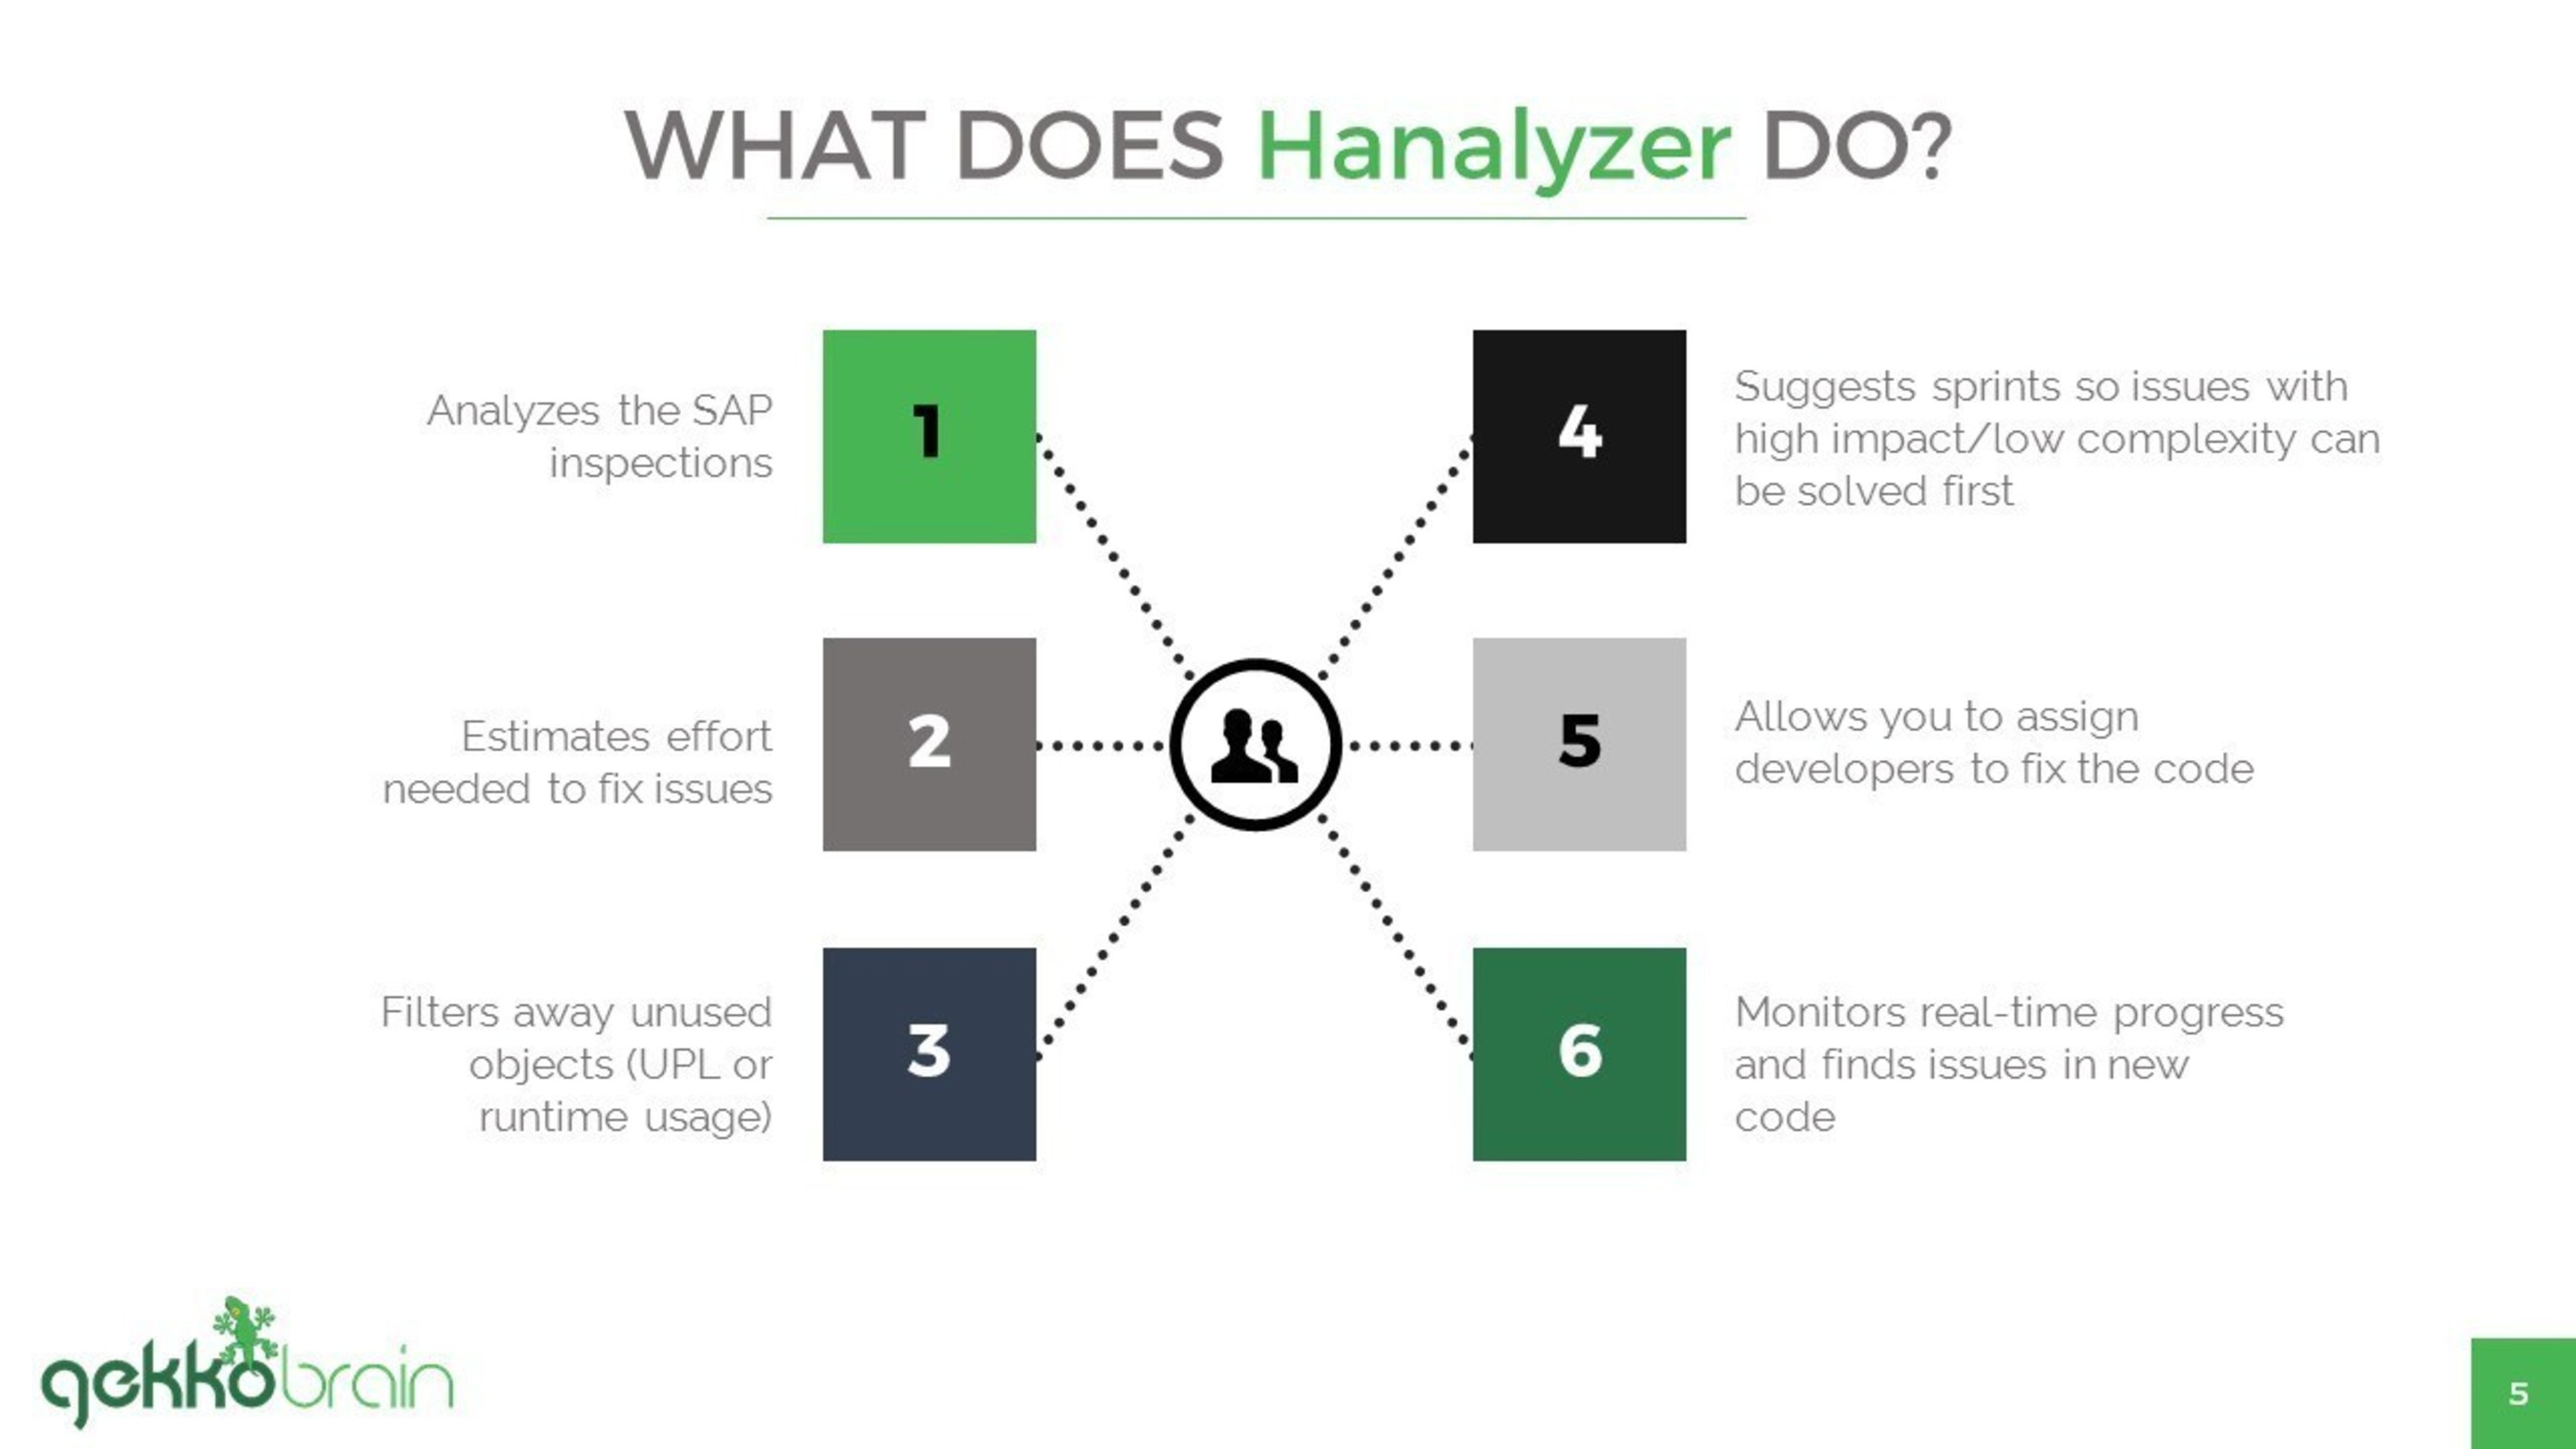 Hanalyzer is designed to help SAP users quickly get their custom code ready for HANA. After an upgrade, Hanalyzer keeps track of new code to ensure that it's still HANA ready.